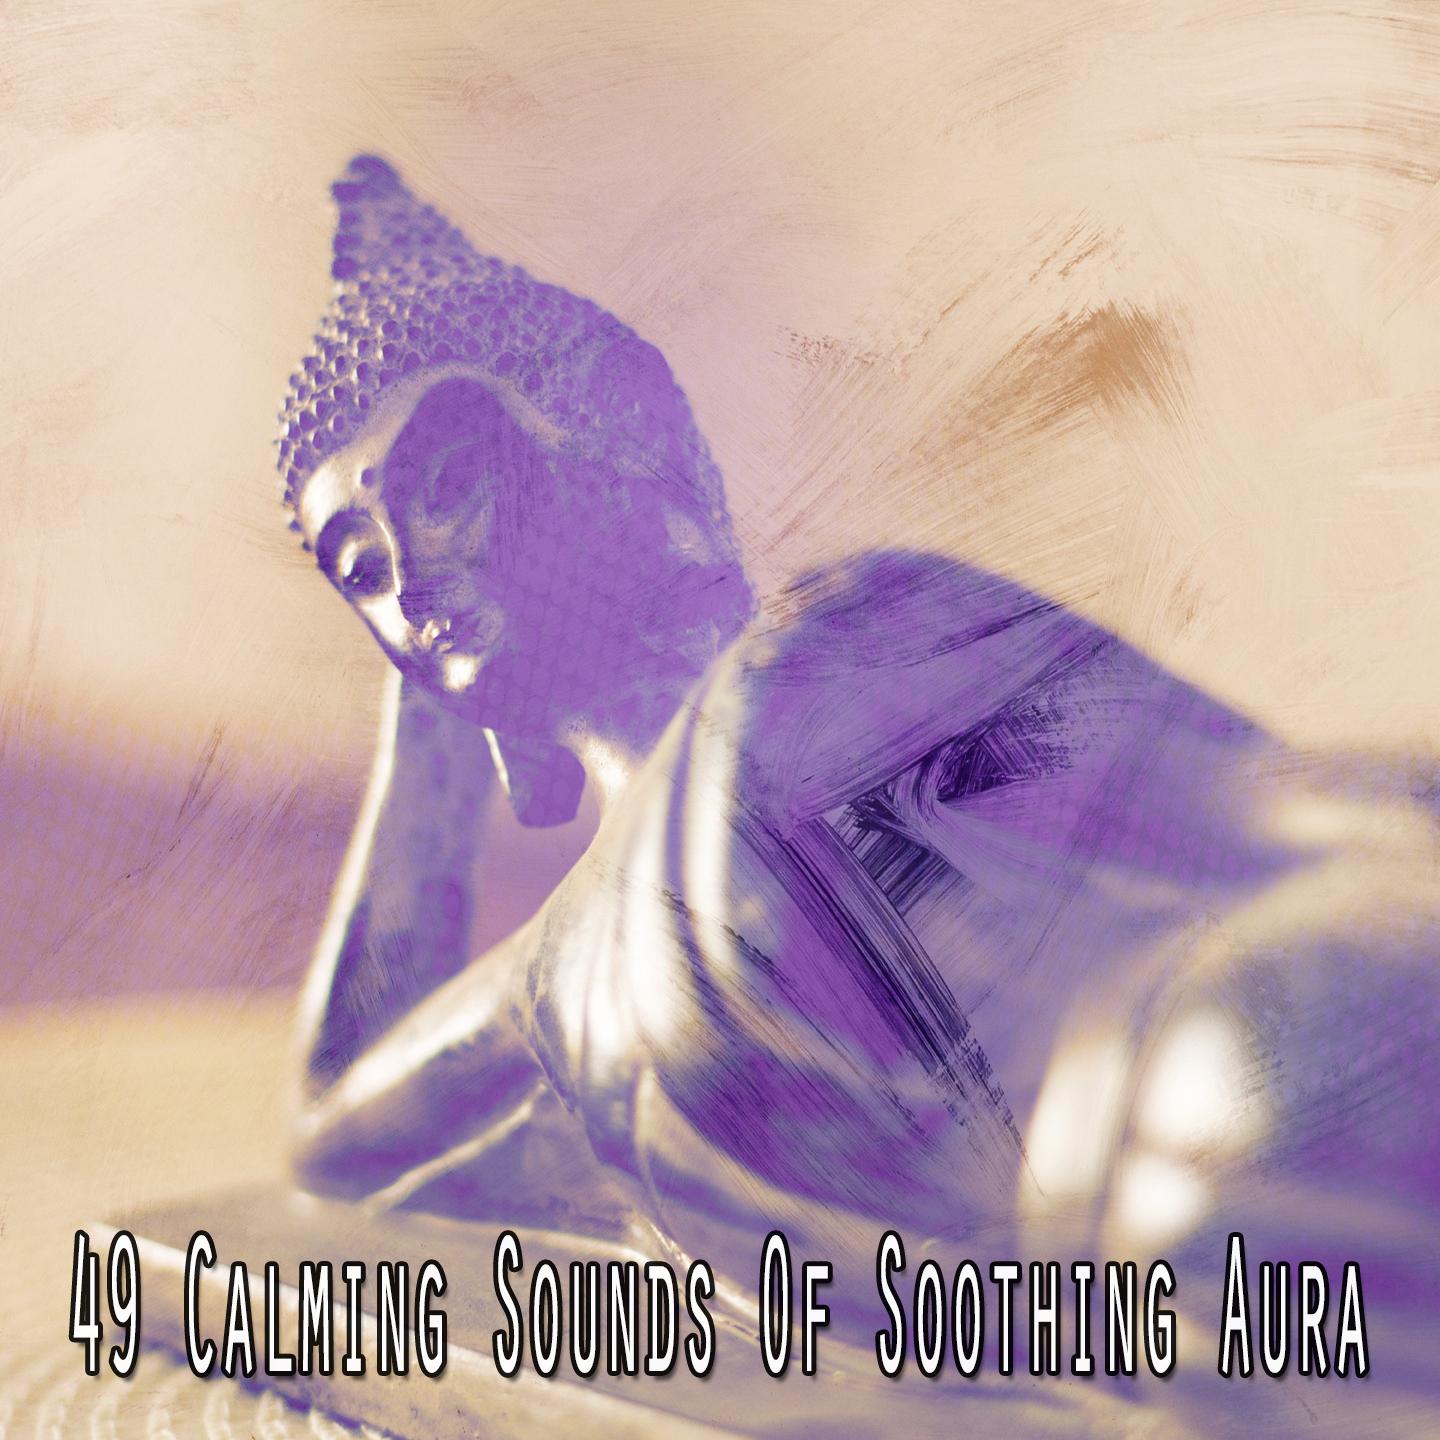 49 Calming Sounds of Soothing Aura